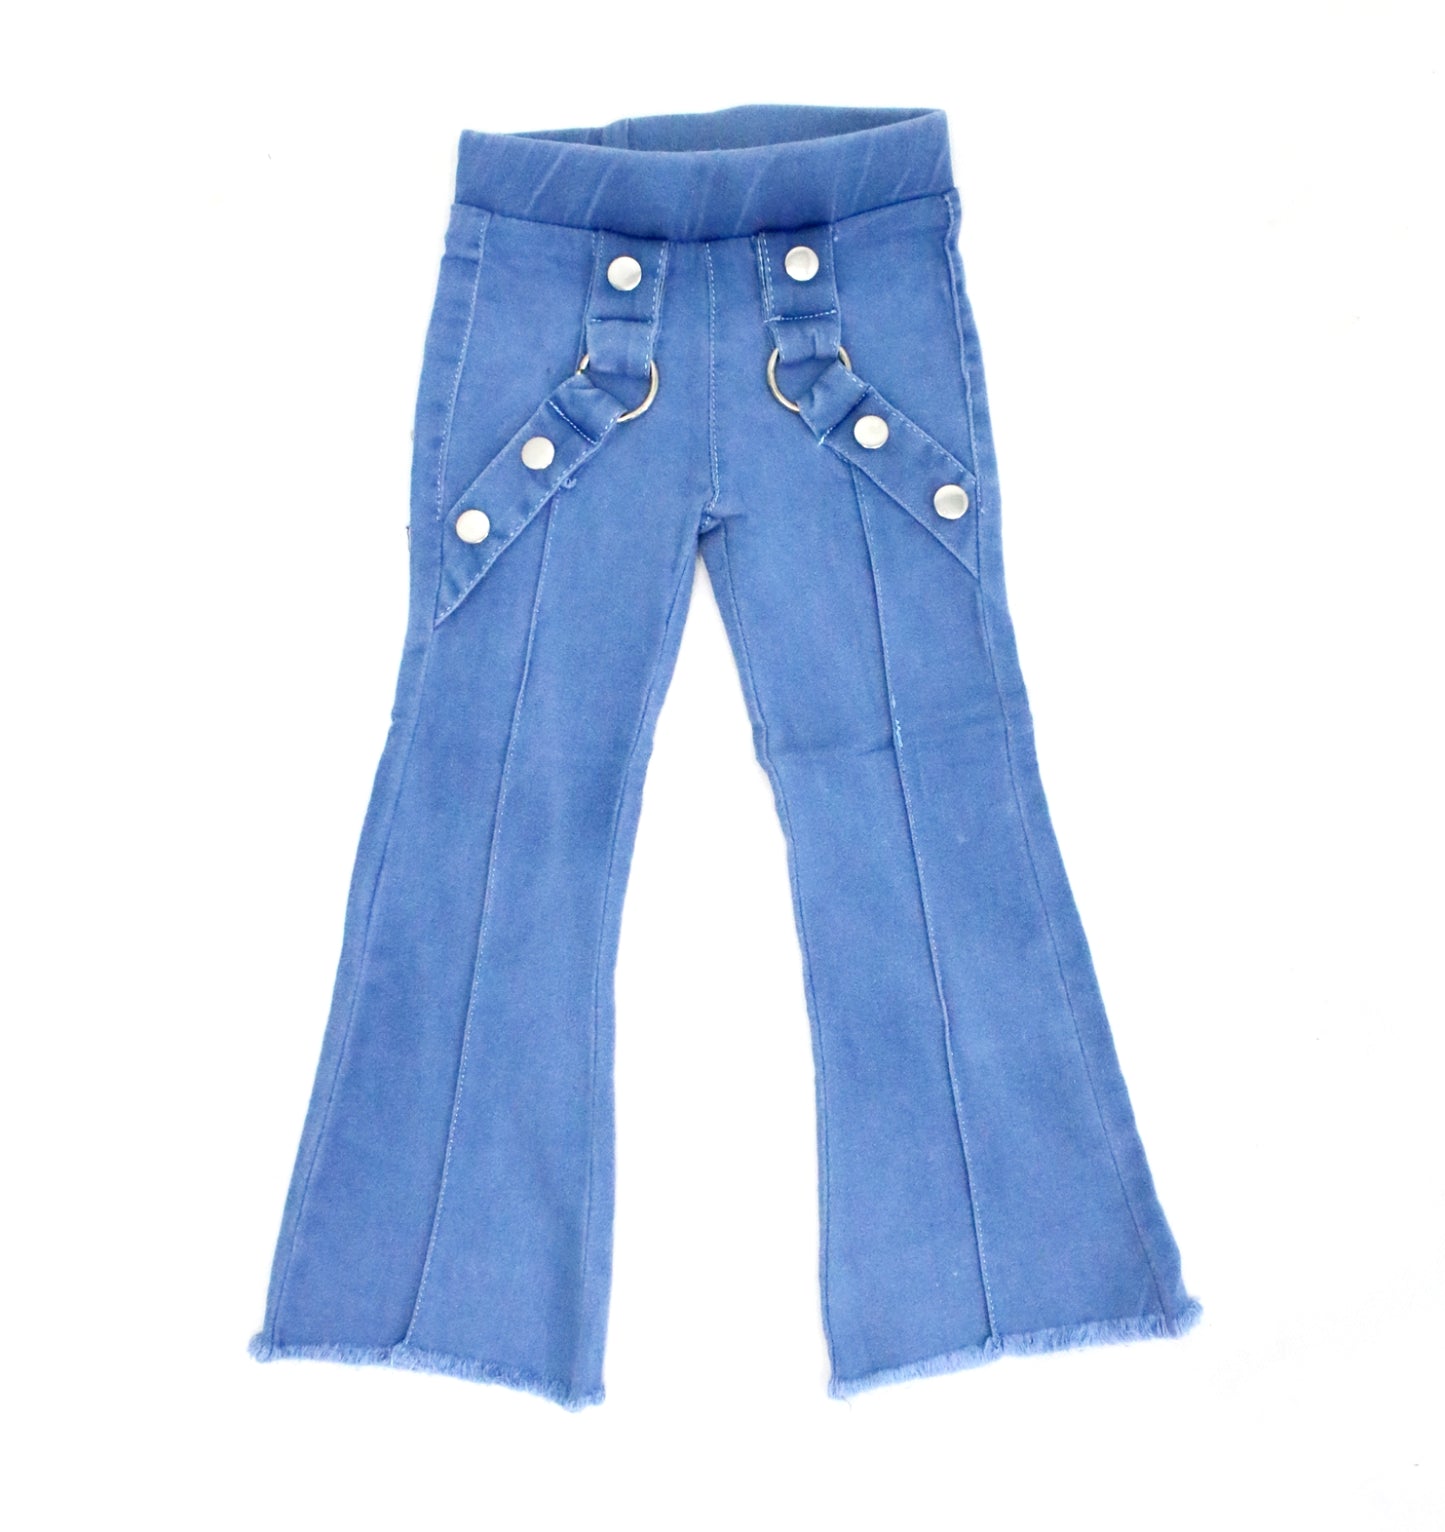 Girl Jeans Flare Pent Fashion